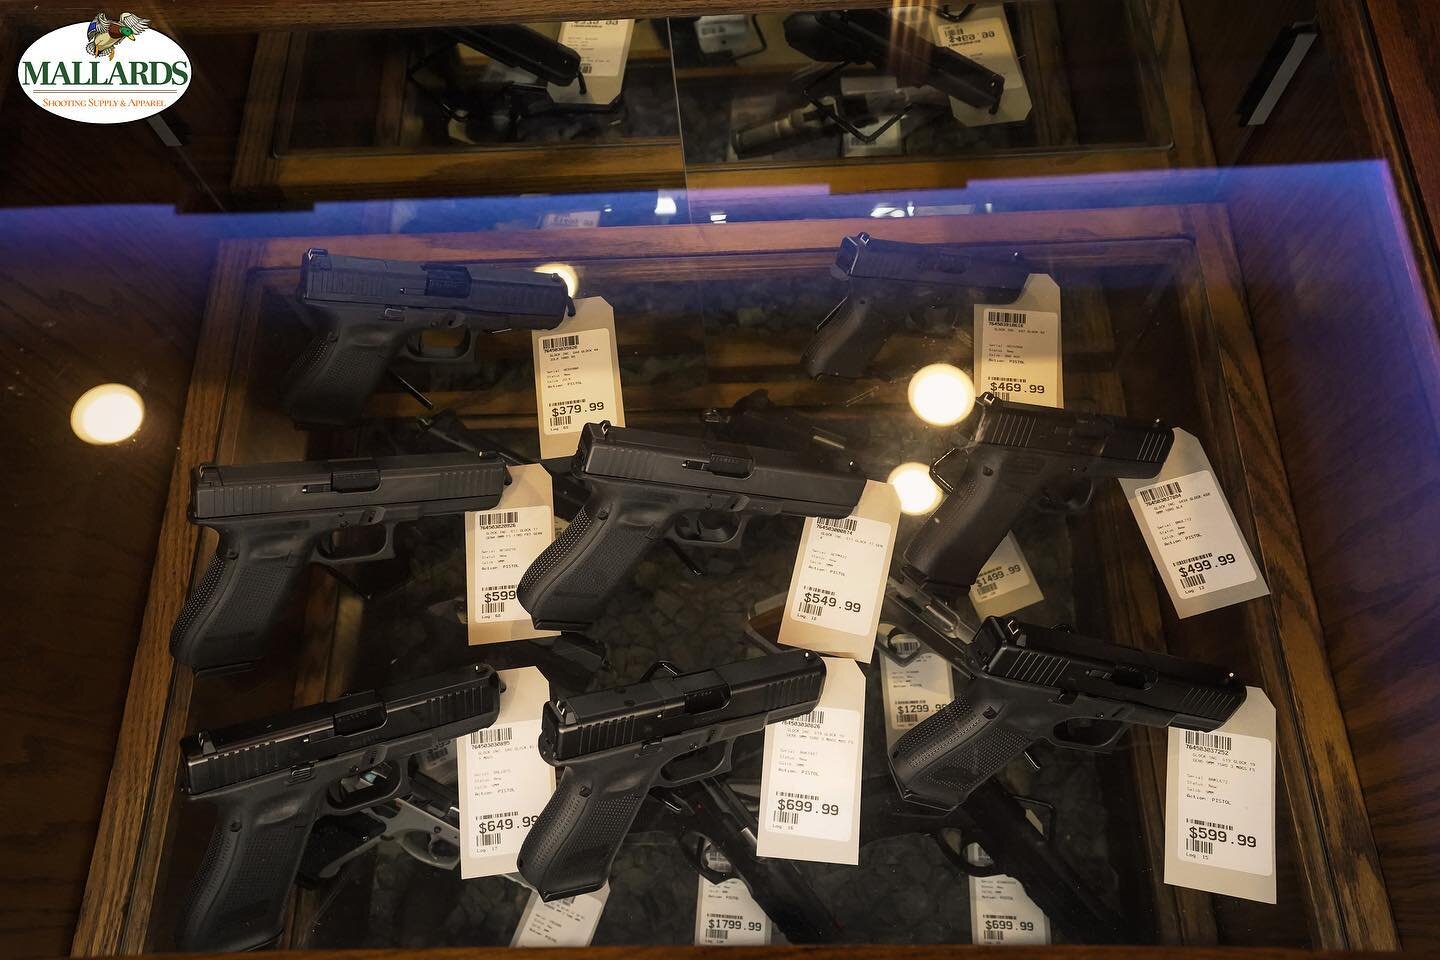 We have Glocks in-stock and ready for the range here at Mallards. Come check them out and let us know what you think of the store!⠀
⠀
⠀
⠀
⠀
⠀
⠀
#glock #sigsauer #smithandwesson #beretta #ruger #walther #springfield #remington #fnherstal #browing #fir